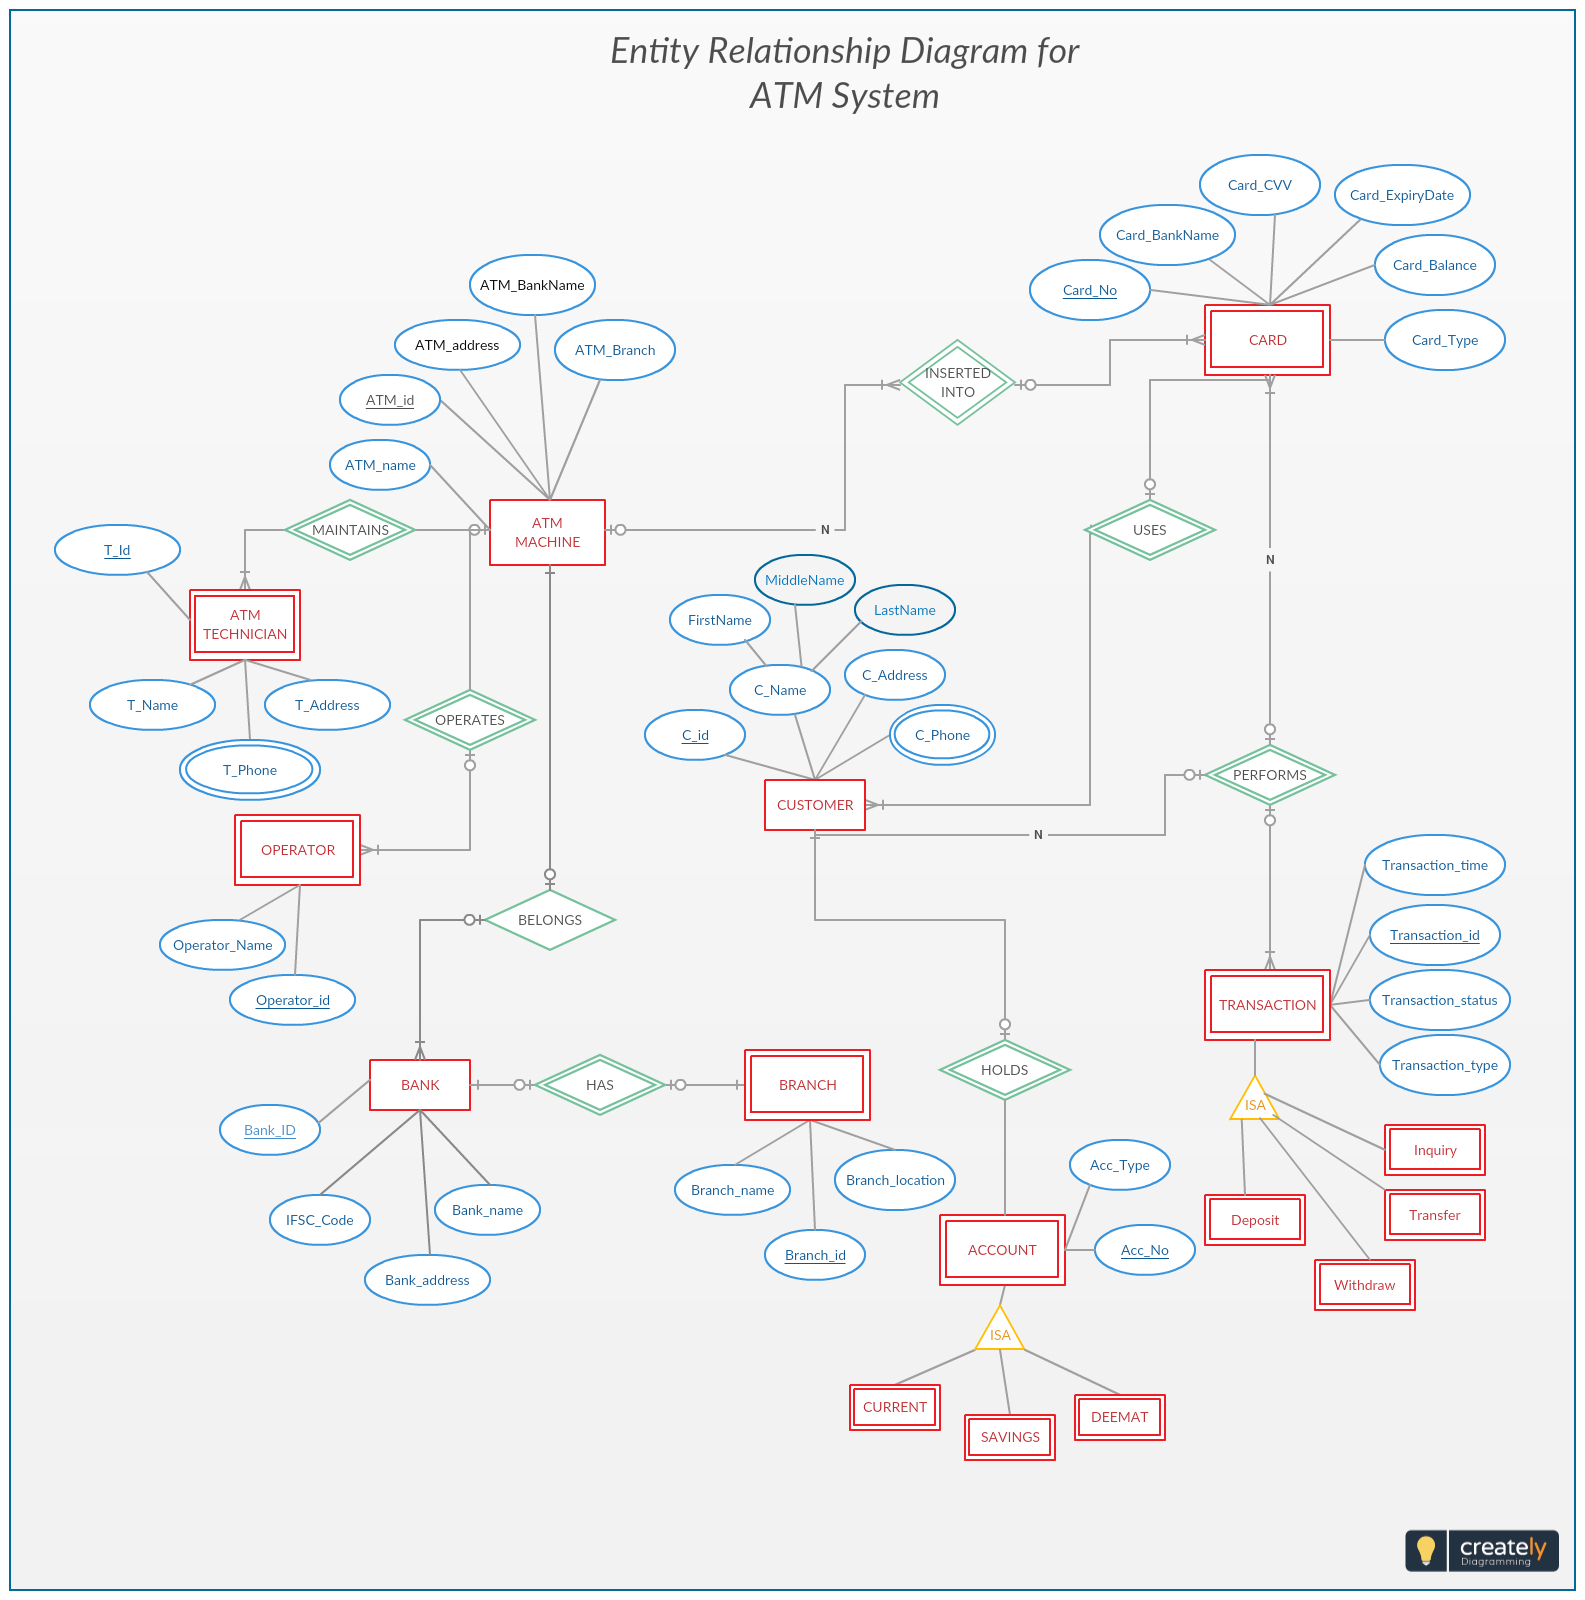 Pin On Entity Relationship Diagram Templates for Entity Relationship Diagram Example